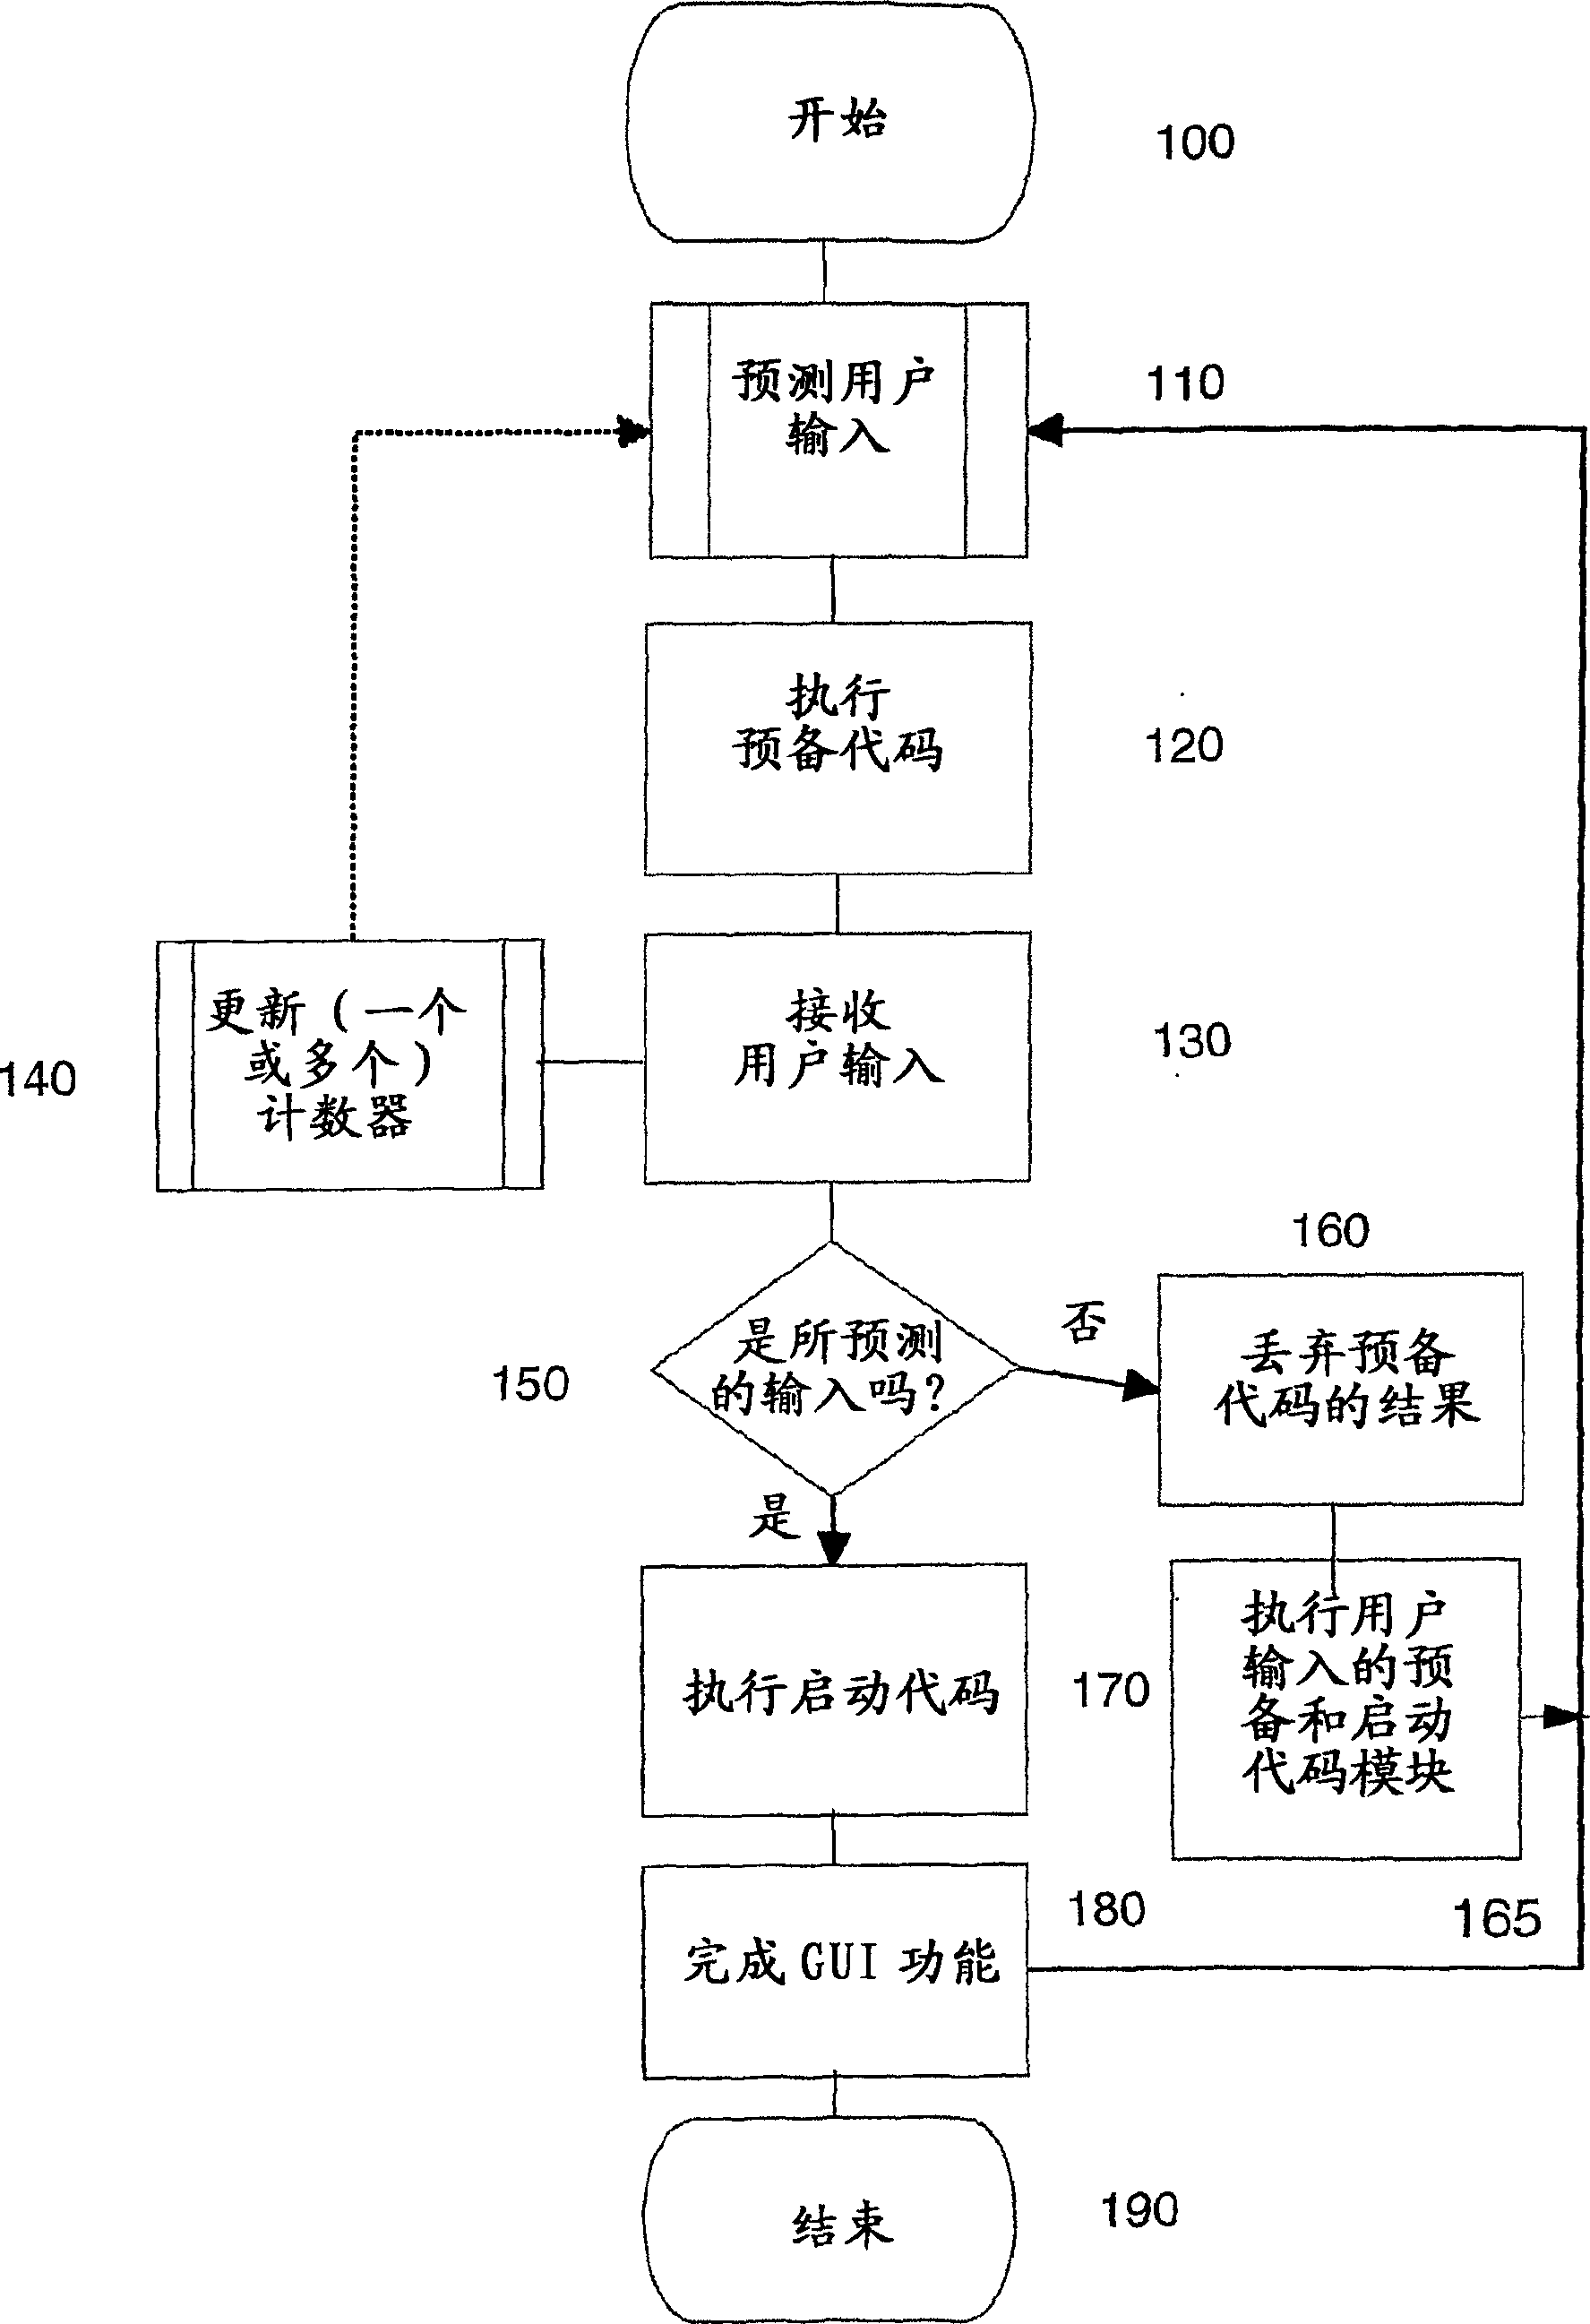 Predictive graphical user interface with speculative execution